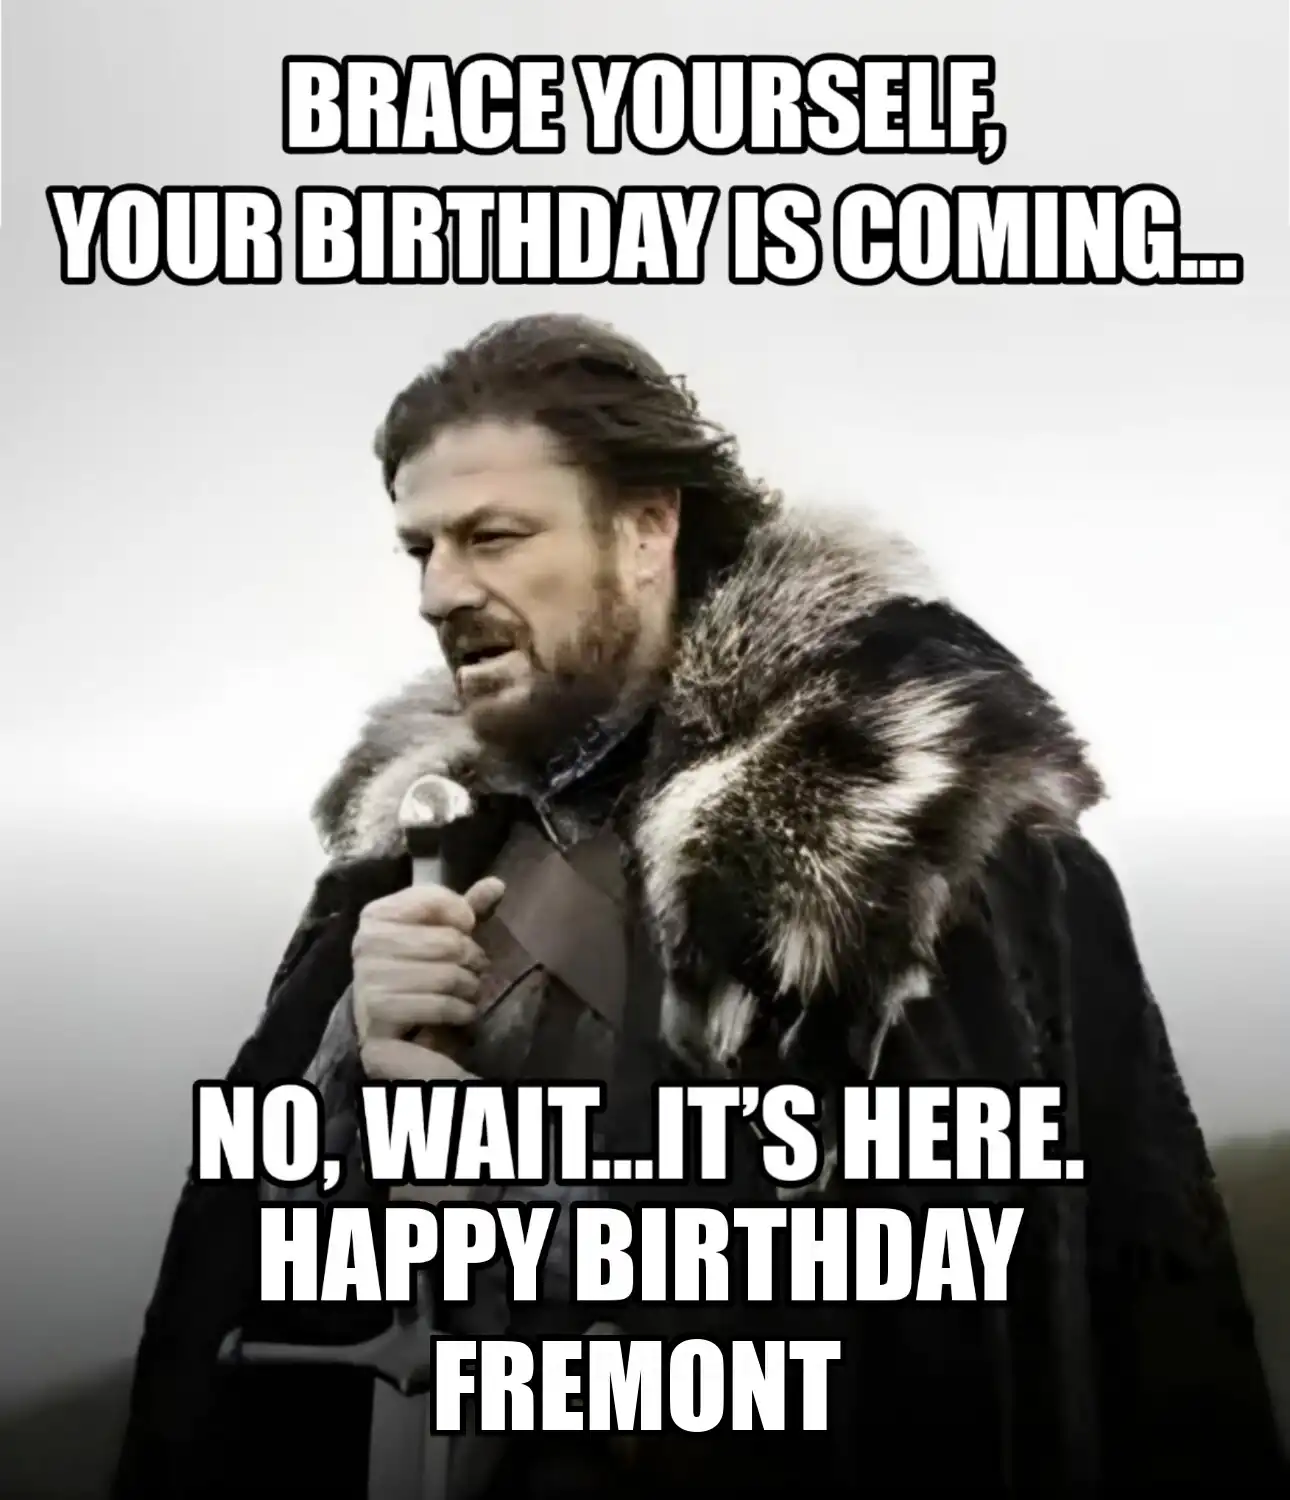 Happy Birthday Fremont Brace Yourself Your Birthday Is Coming Meme